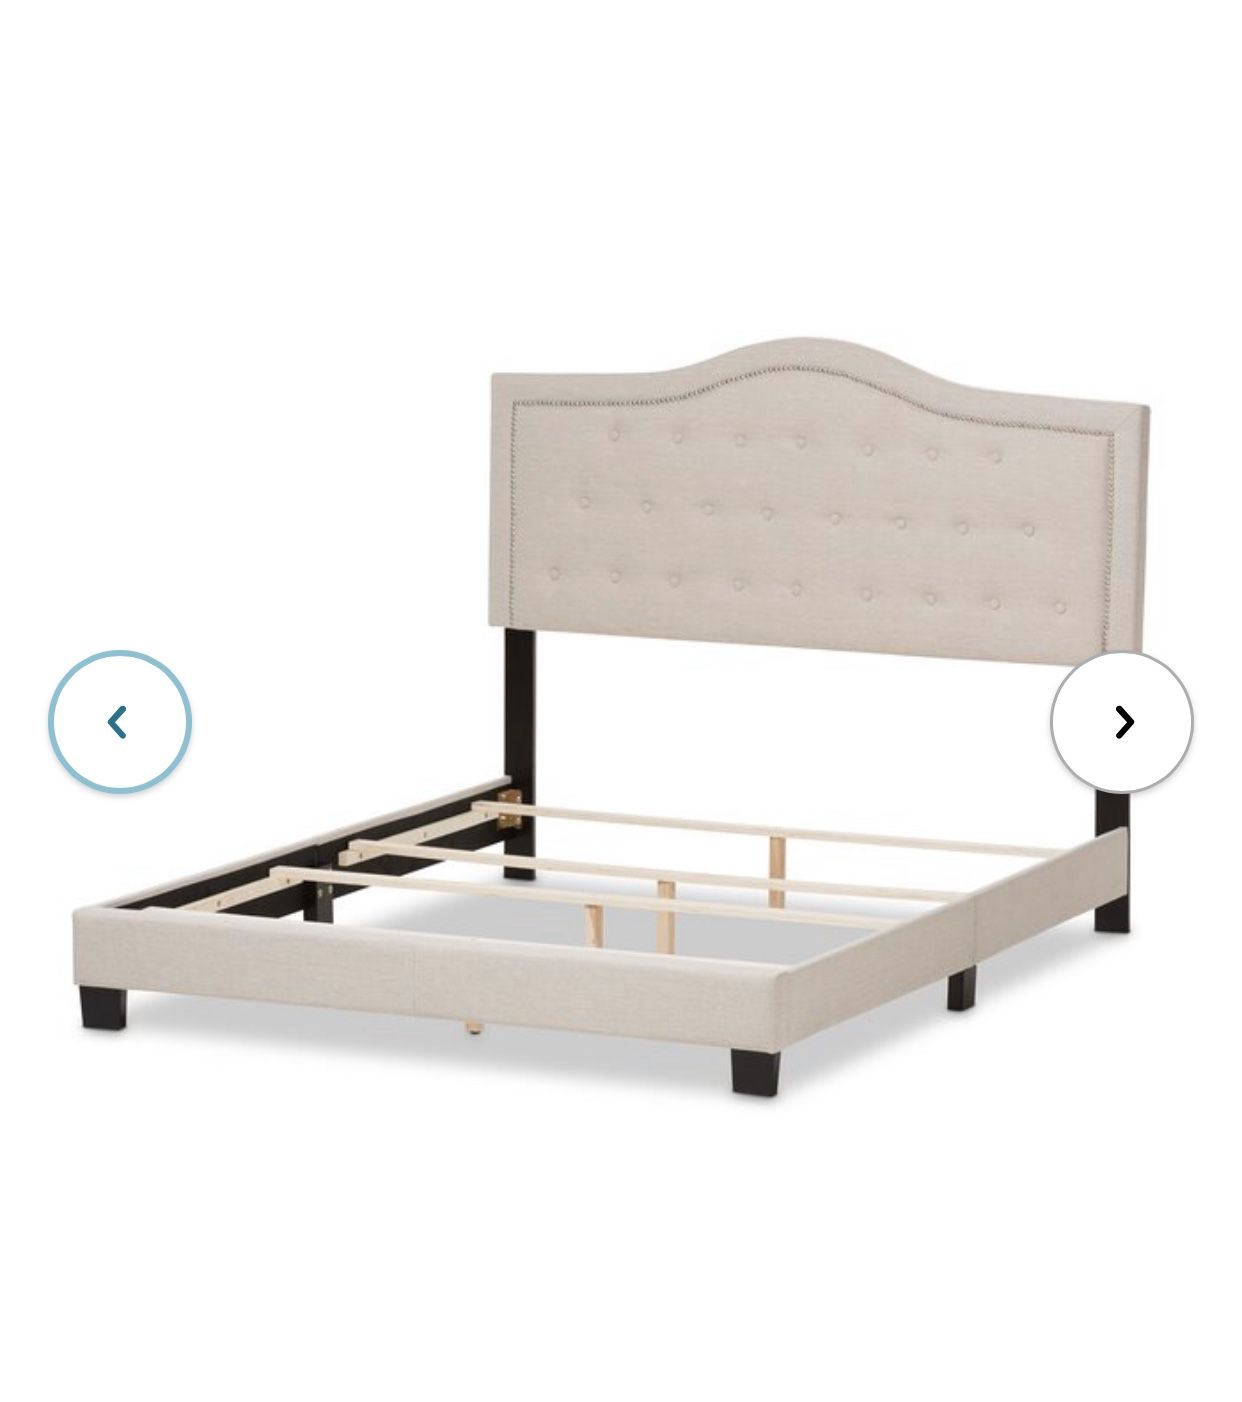 King size bed frame w/box spring